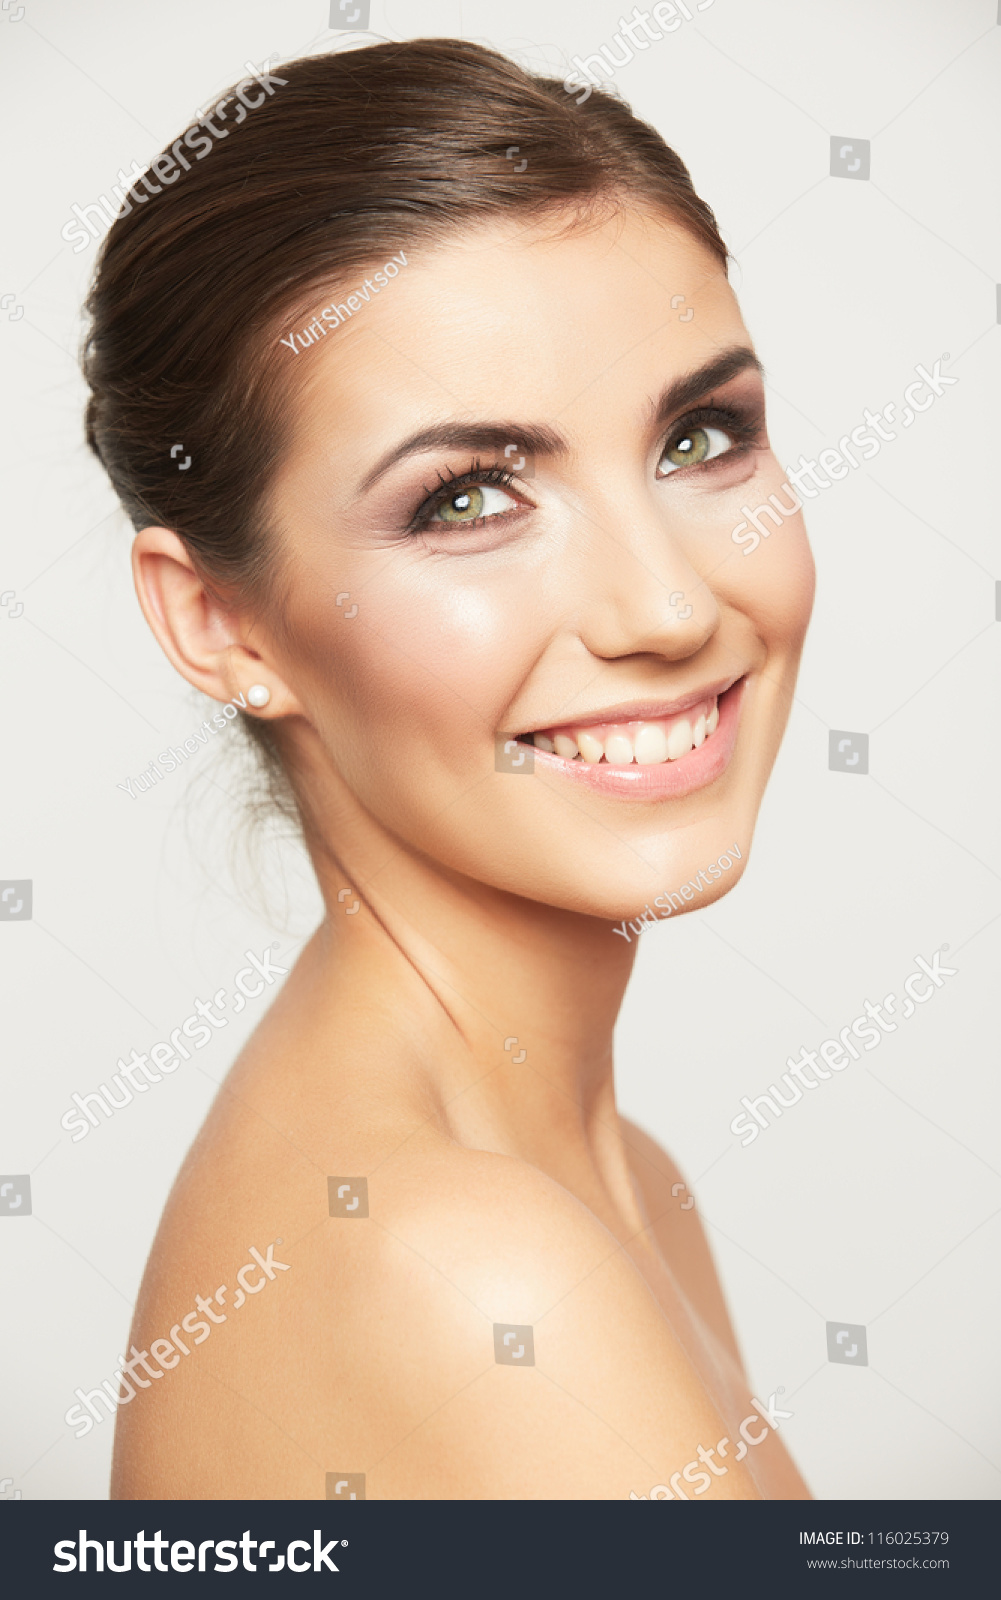 Close up portrait of beautiful young woman face. Isolated on white background. Portrait of a female model. #116025379